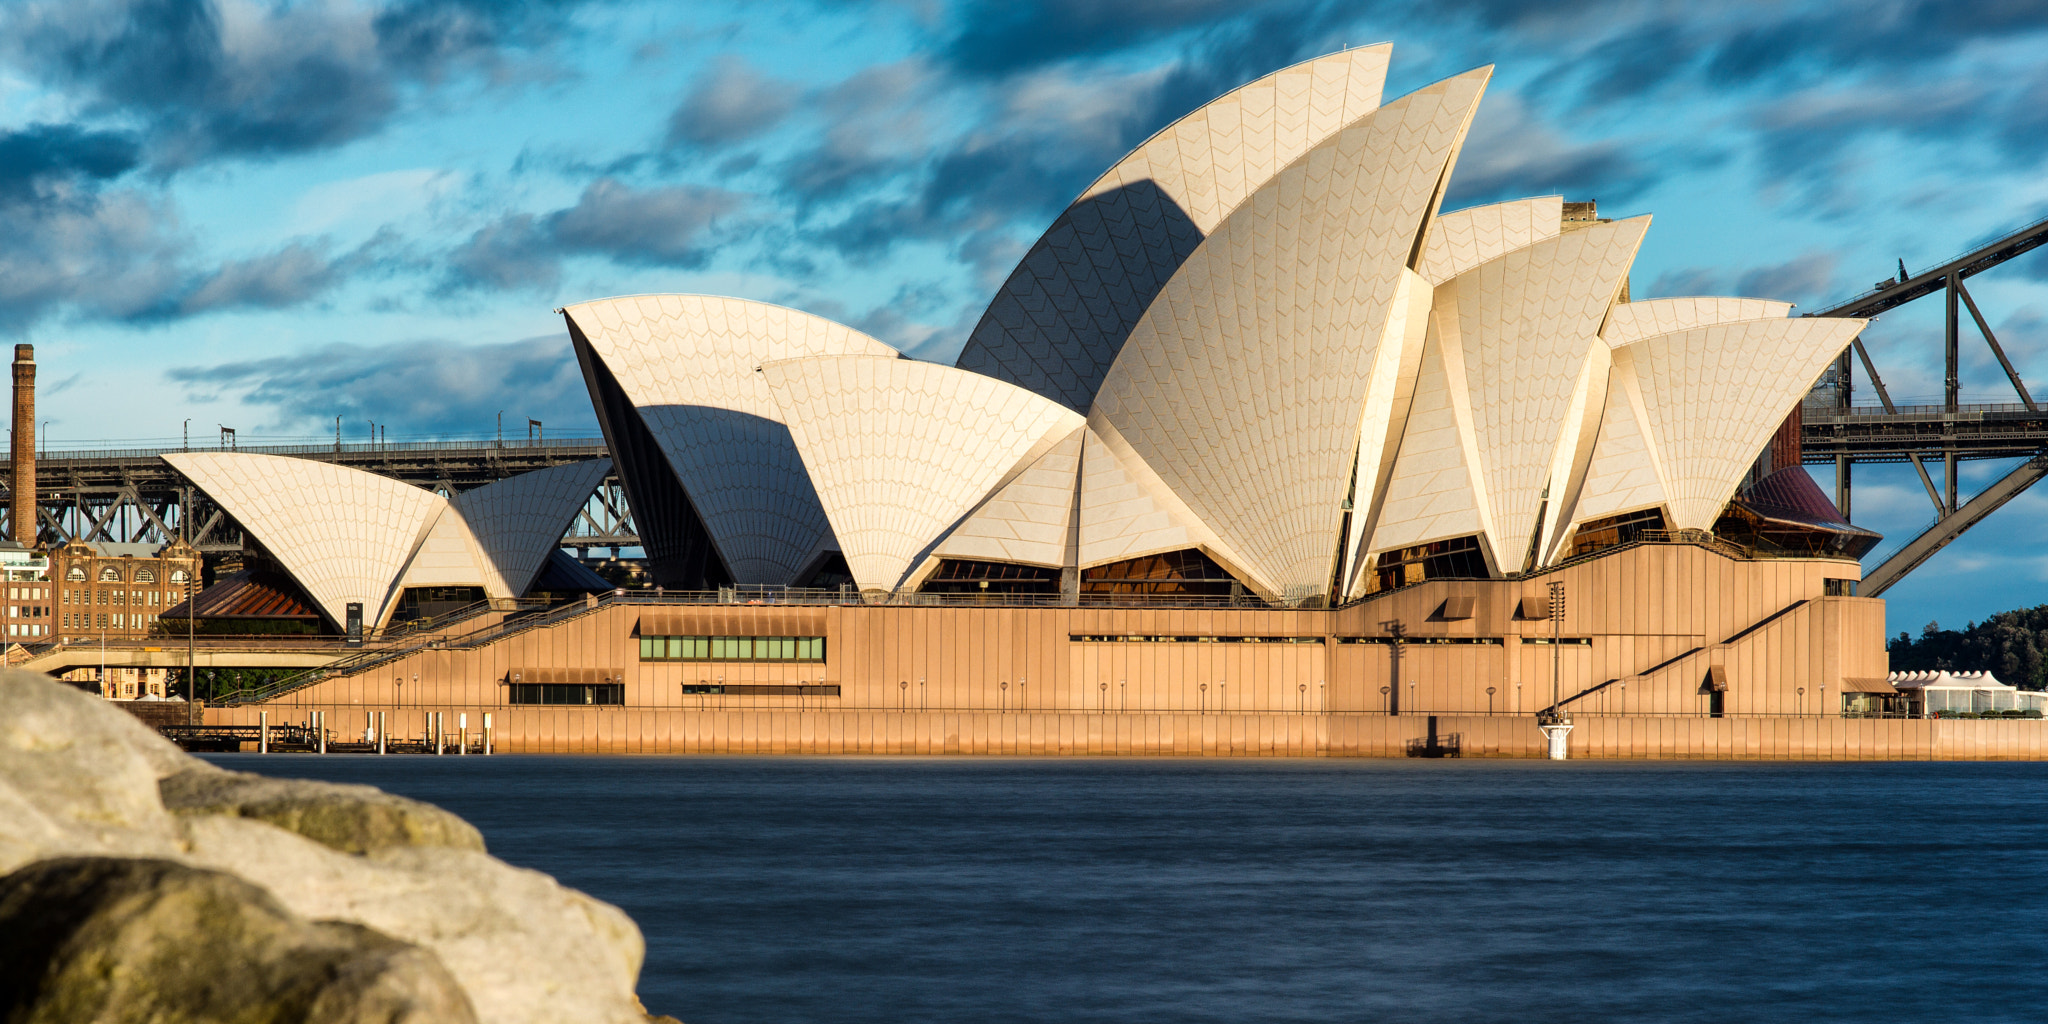 Leica APO-Telyt-M 135mm F3.4 ASPH sample photo. The sydney opera house in full sail photography